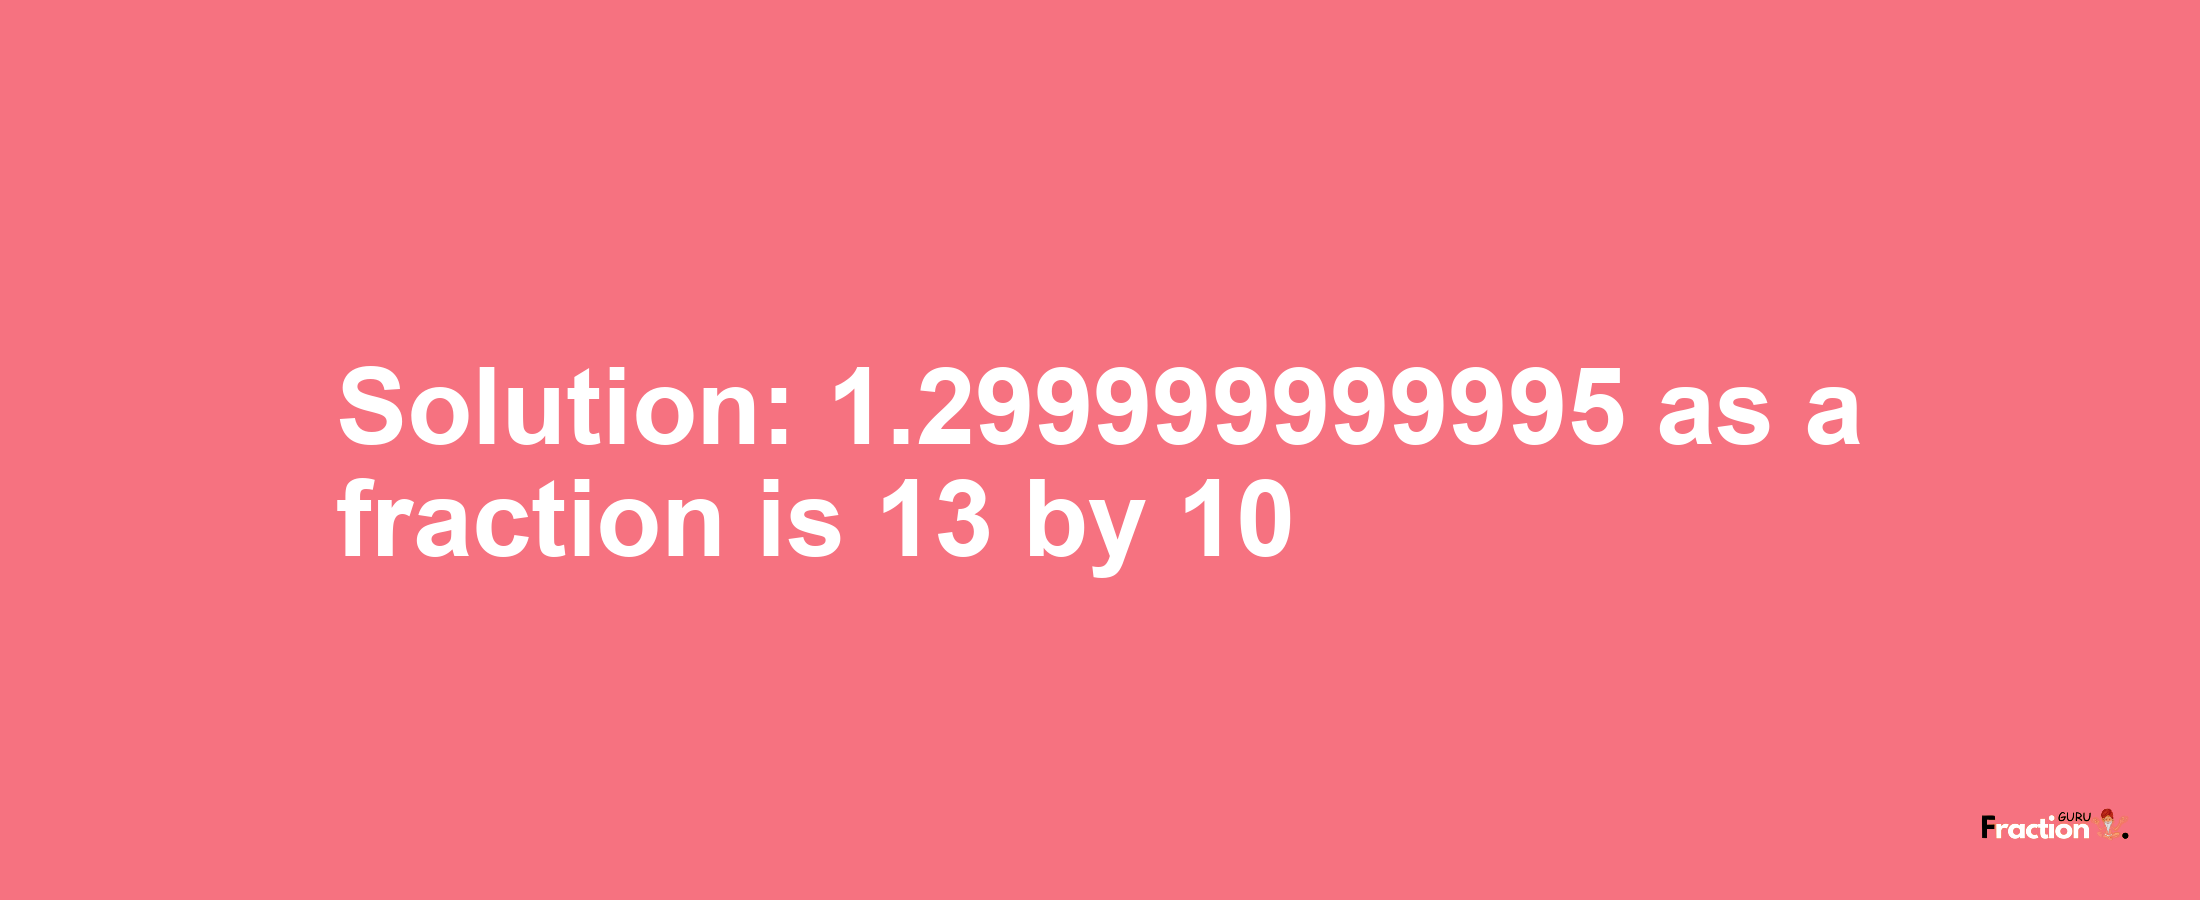 Solution:1.299999999995 as a fraction is 13/10